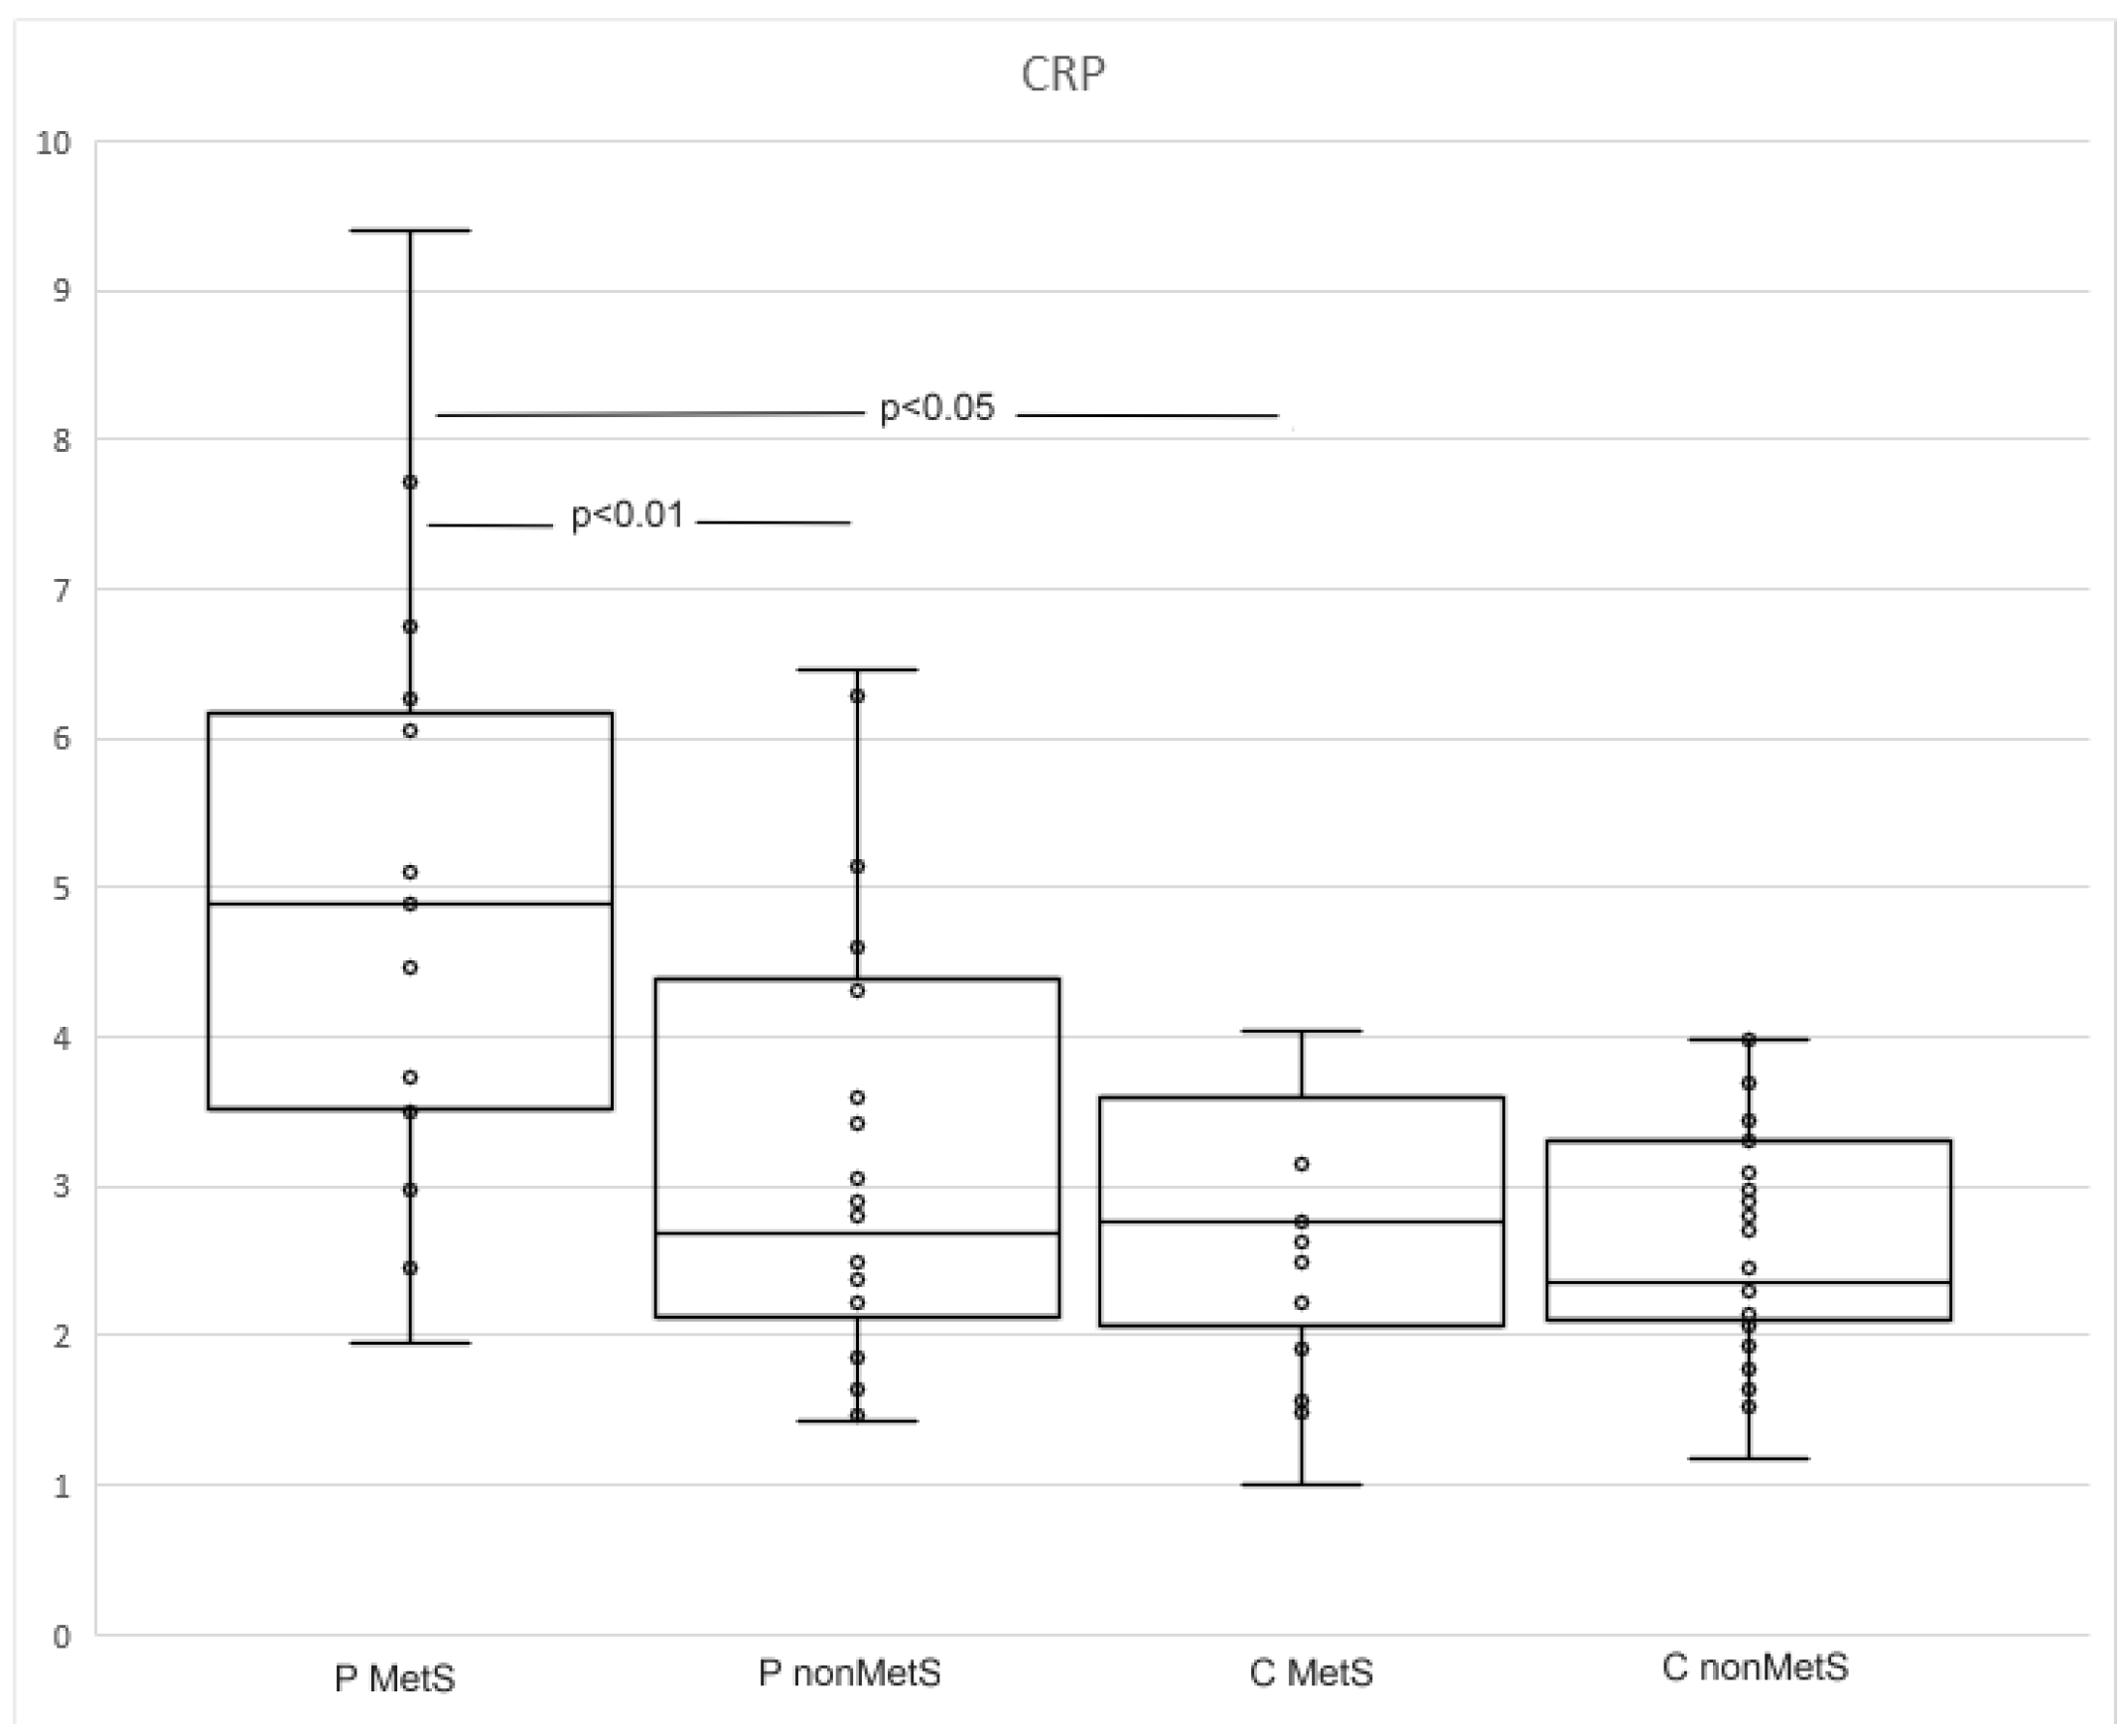 JPM | Free Full-Text | The Presence of Psoriasis, Metabolic Syndrome and  Their Combination Increases the Serum Levels of CRP and CD5L but Not  sCD200R1 and sTLR2 in Participants